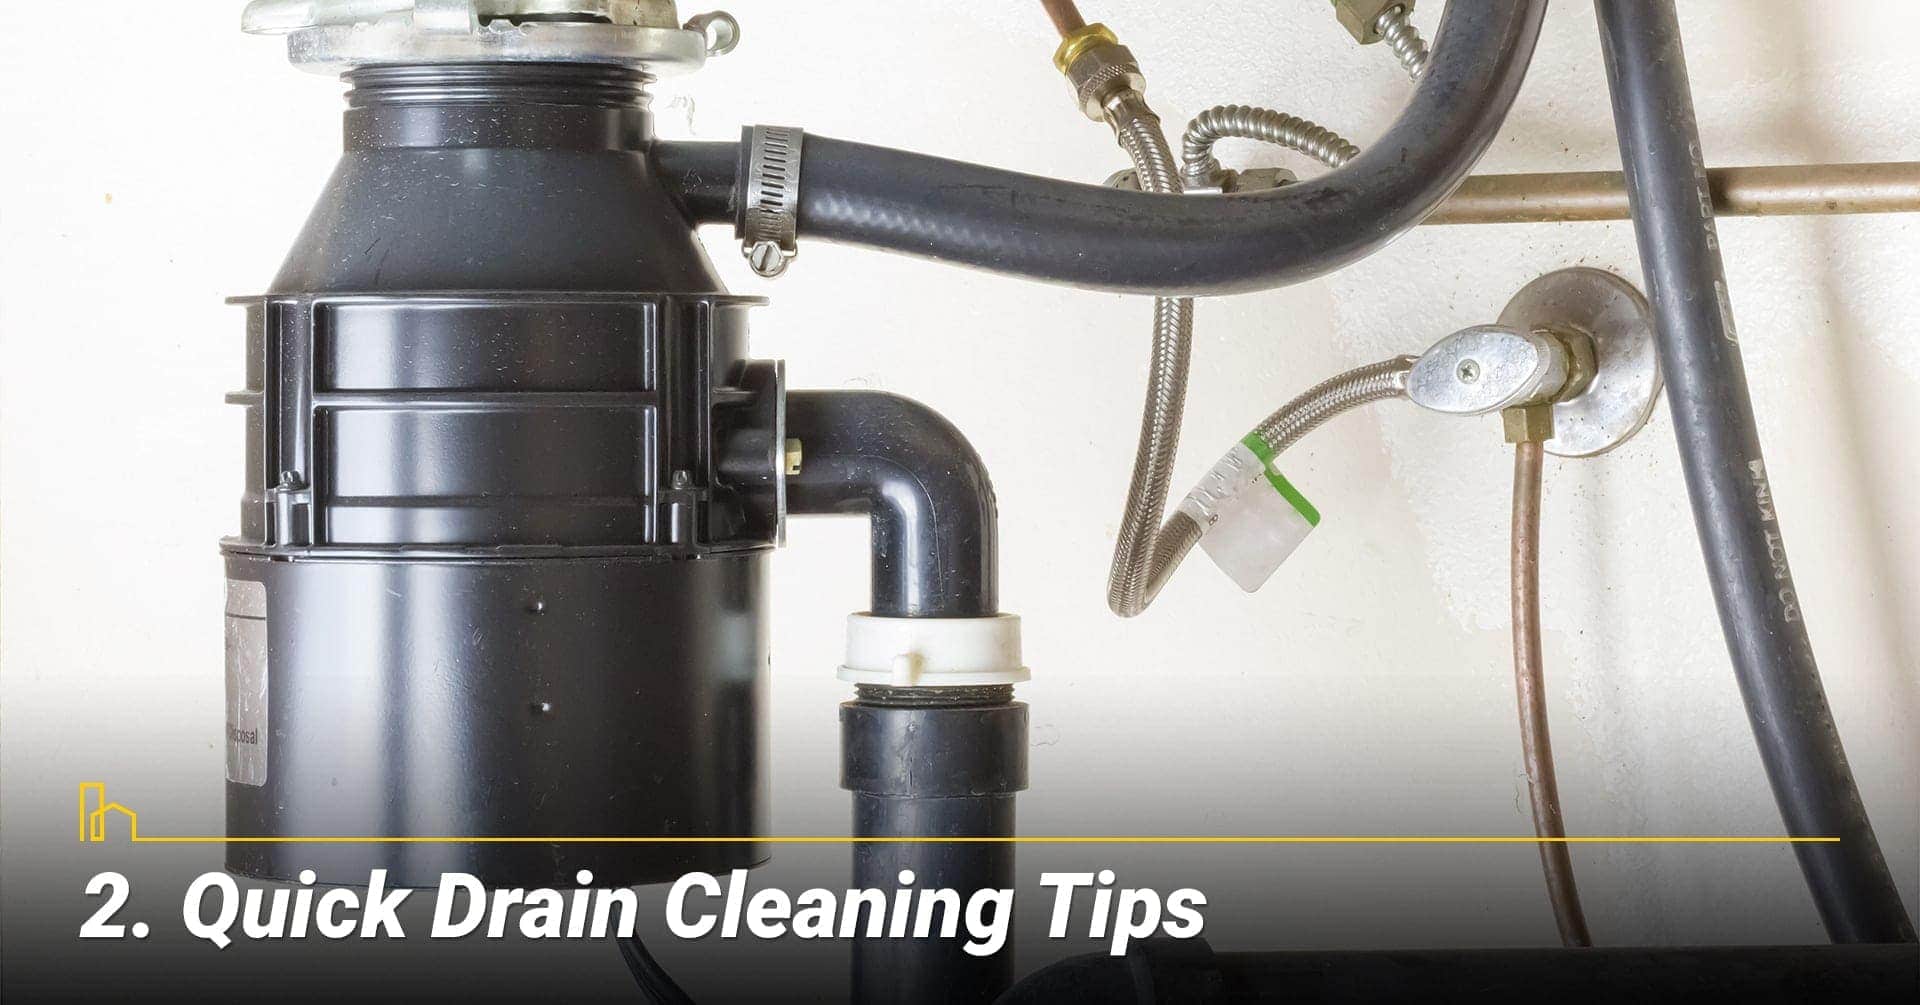 Quick Drain Cleaning Tips, ways to clean your drain